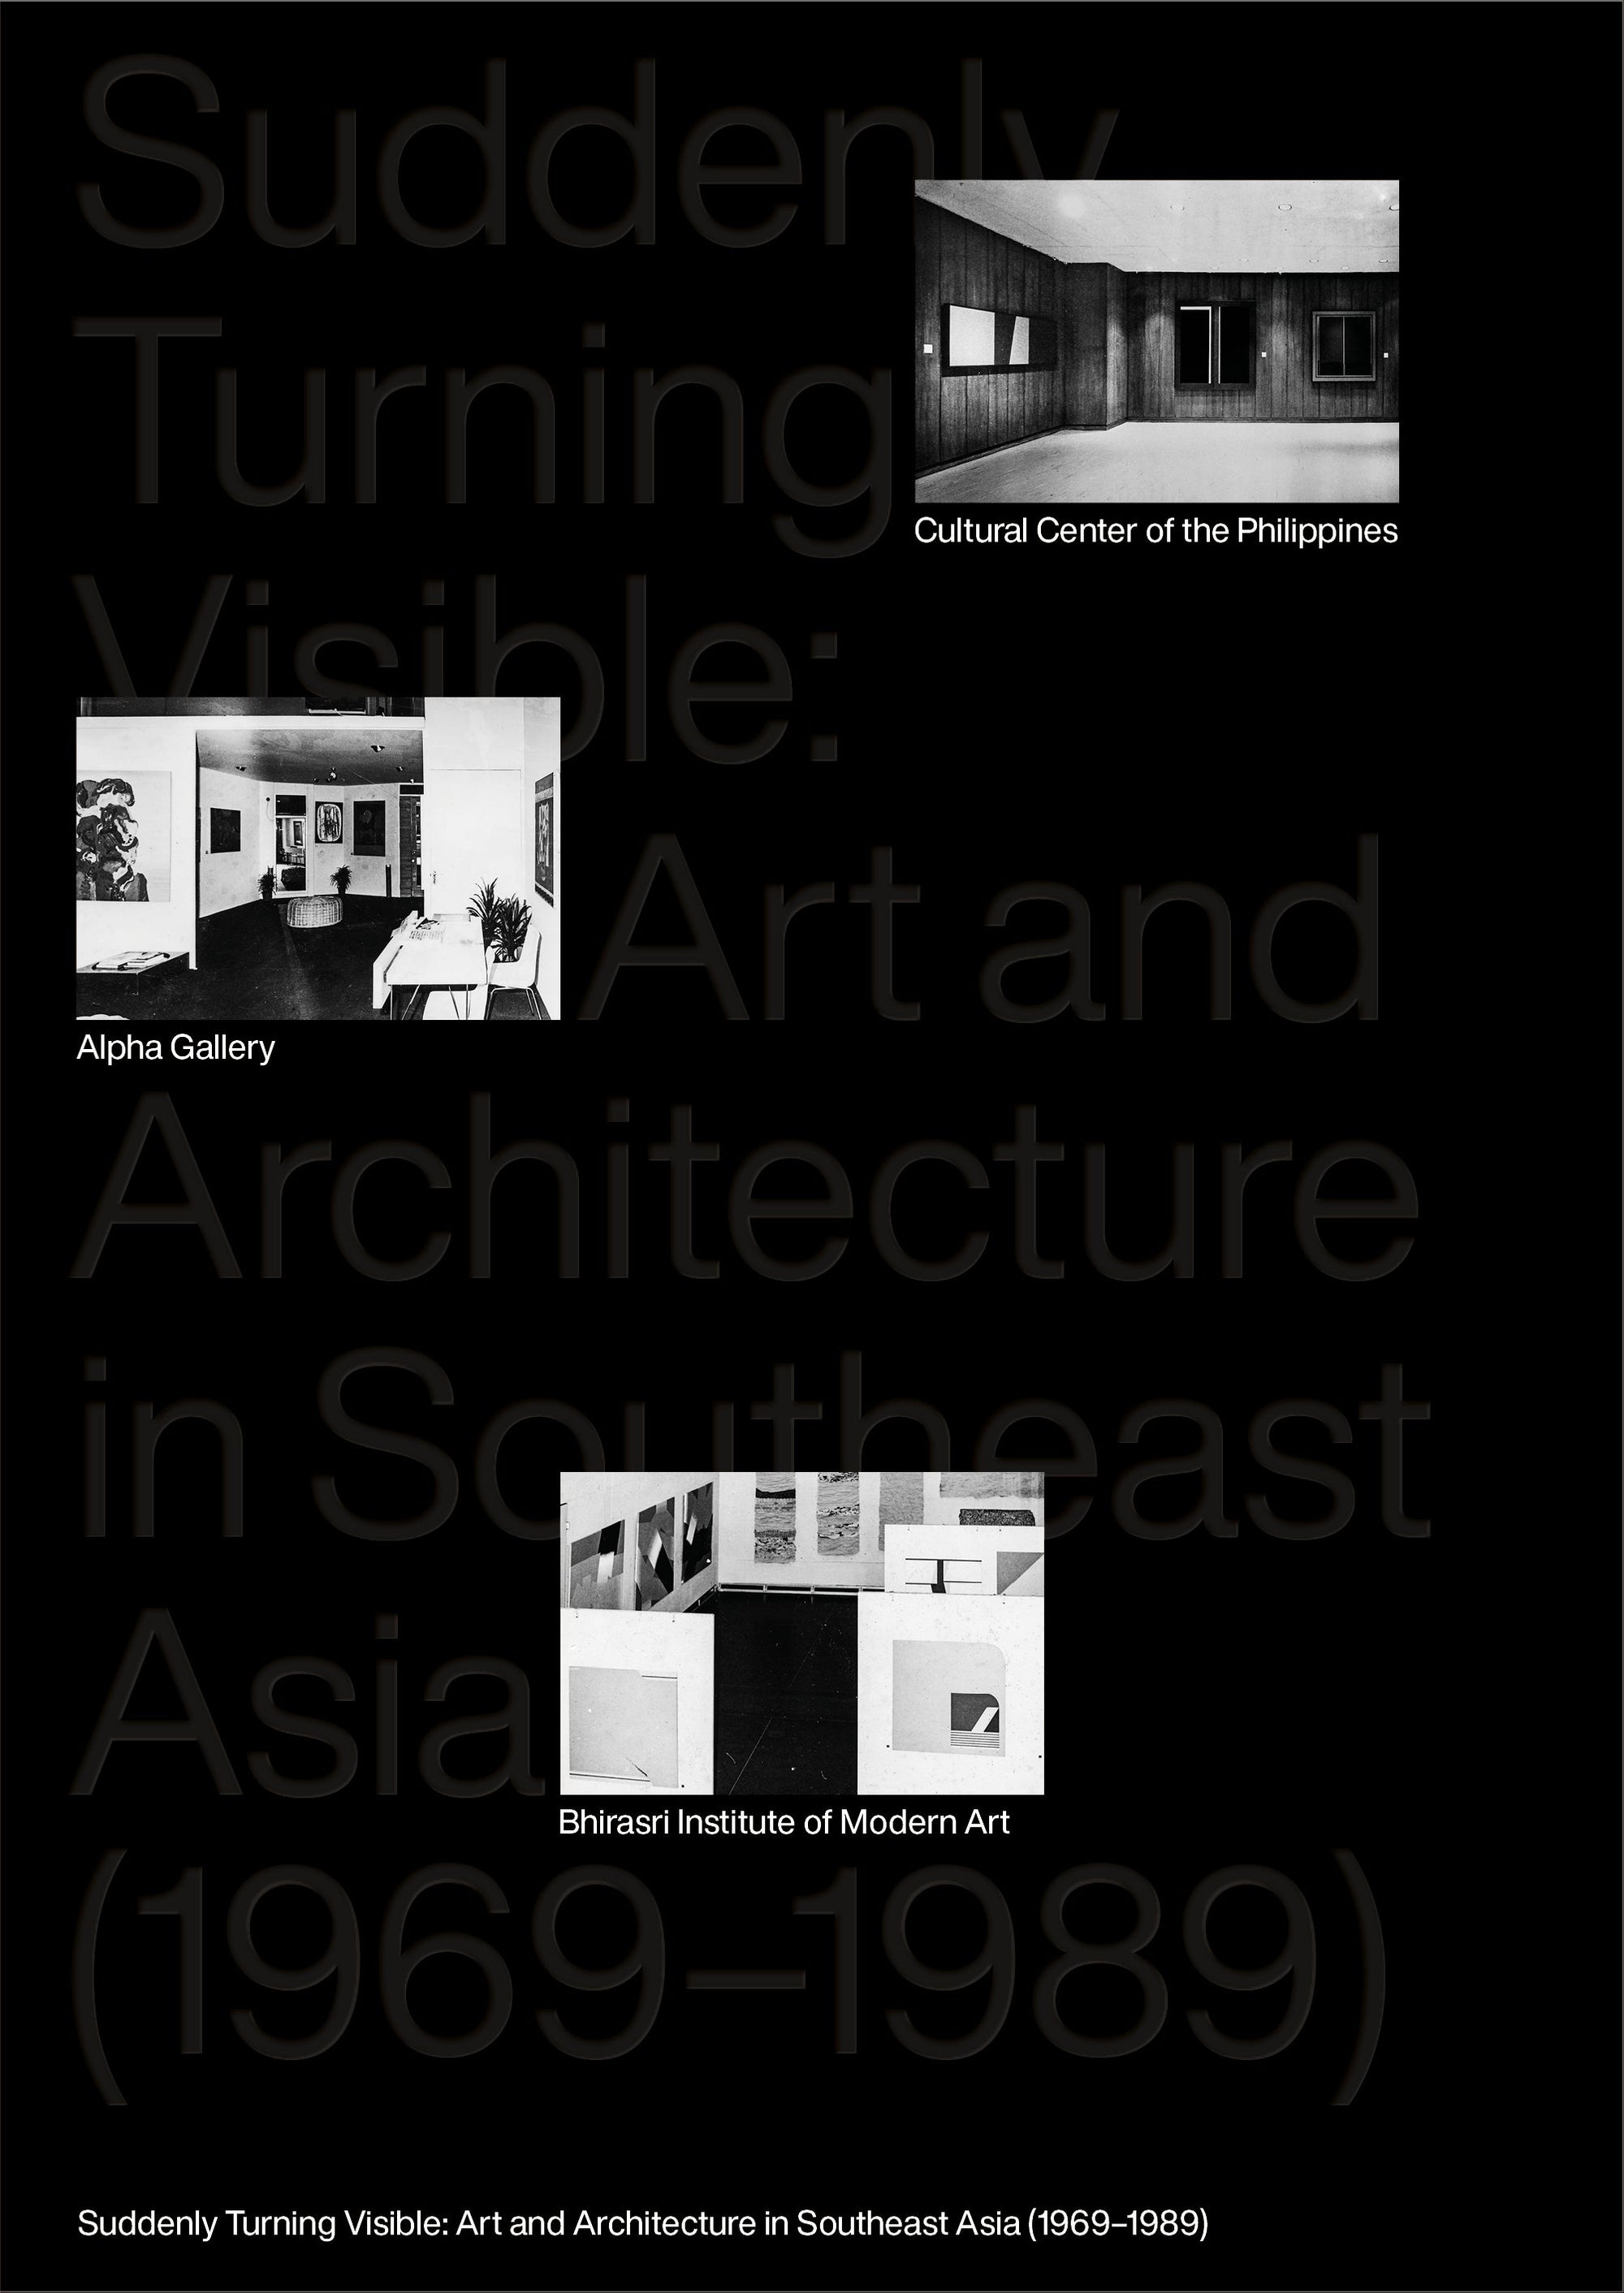 SUDDENLY TURNING VISIBLE: ART AND ARCHITECTURE IN SOUTHEAST ASIA (1969-1989)